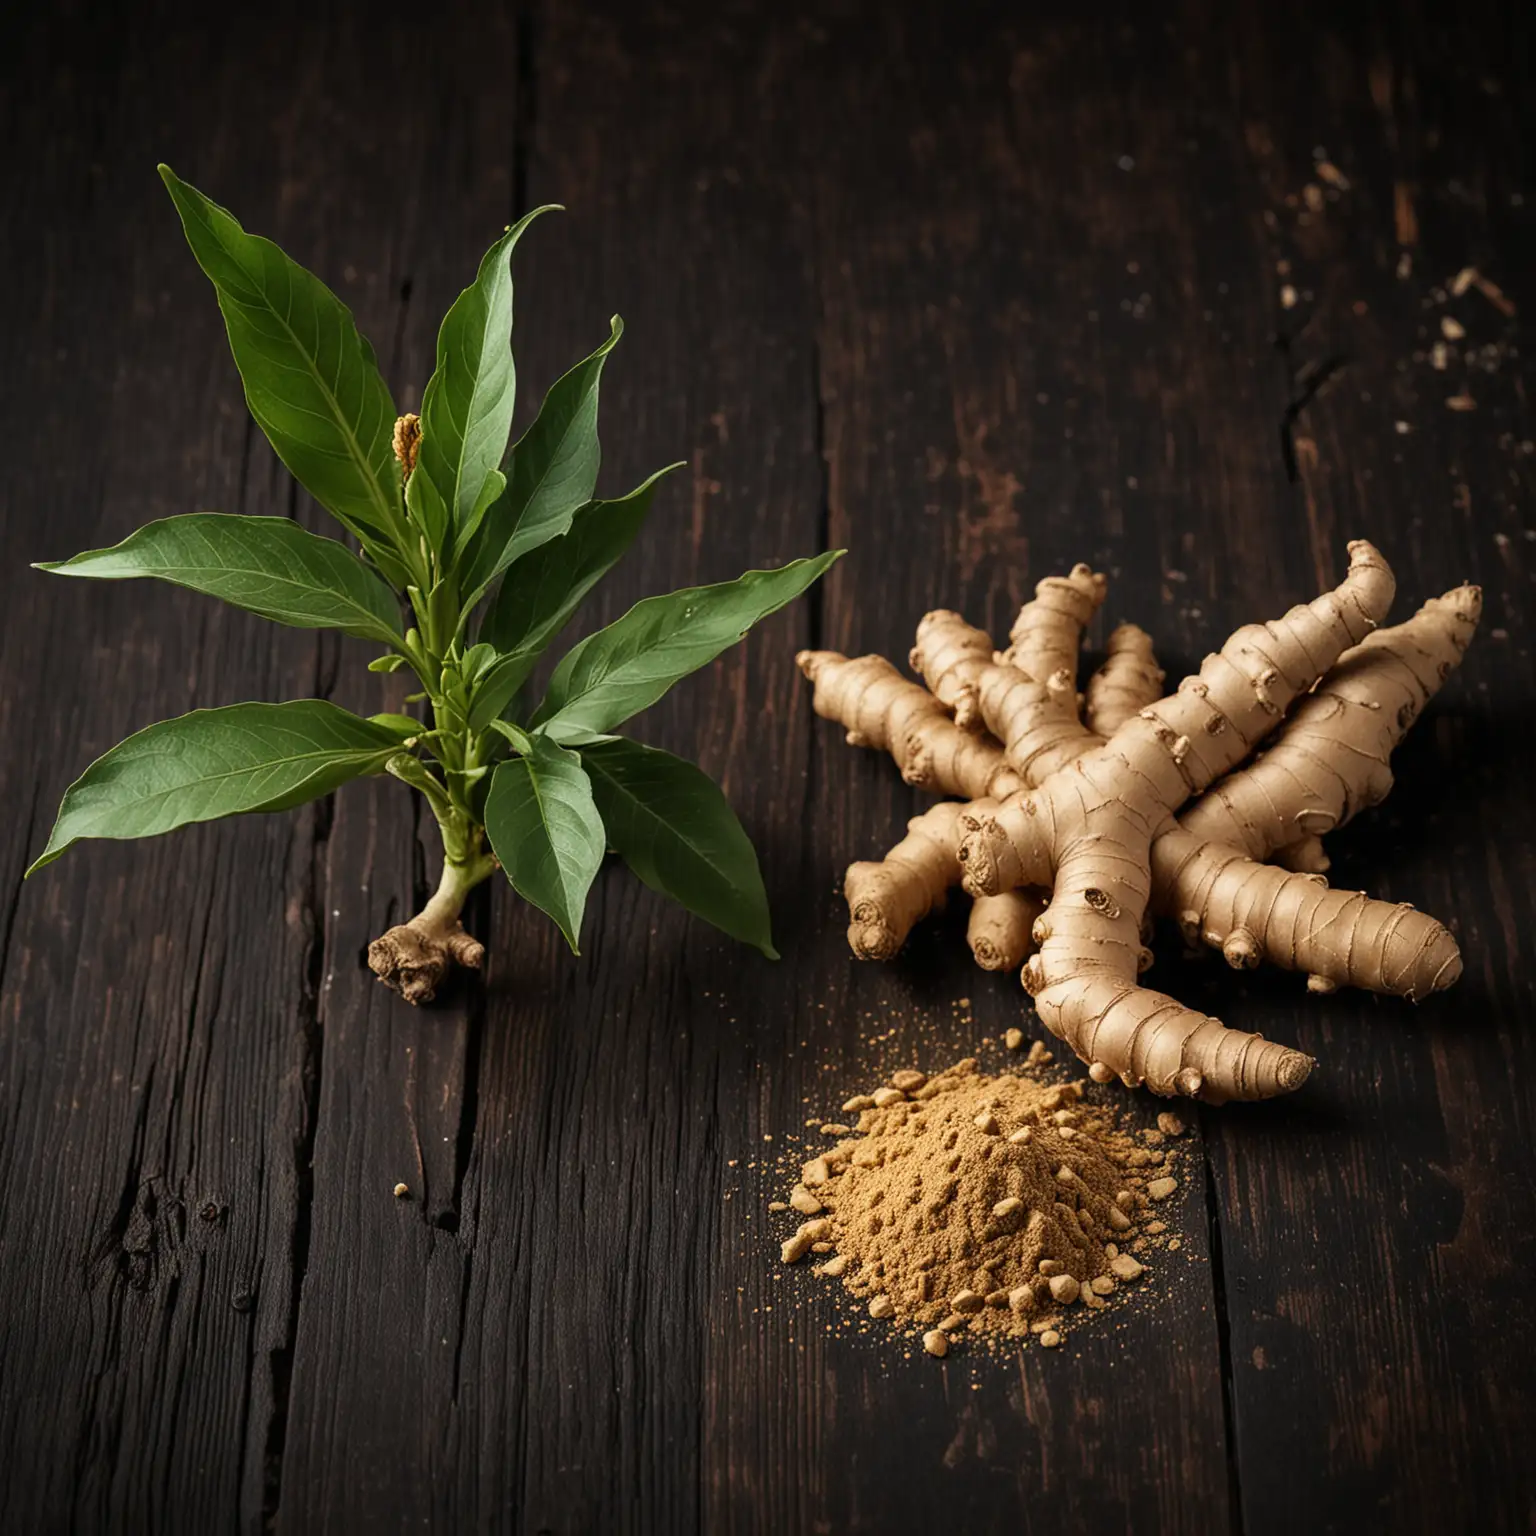 Ginger plant in stem, root, and powder form on dark wooden table with selective focus